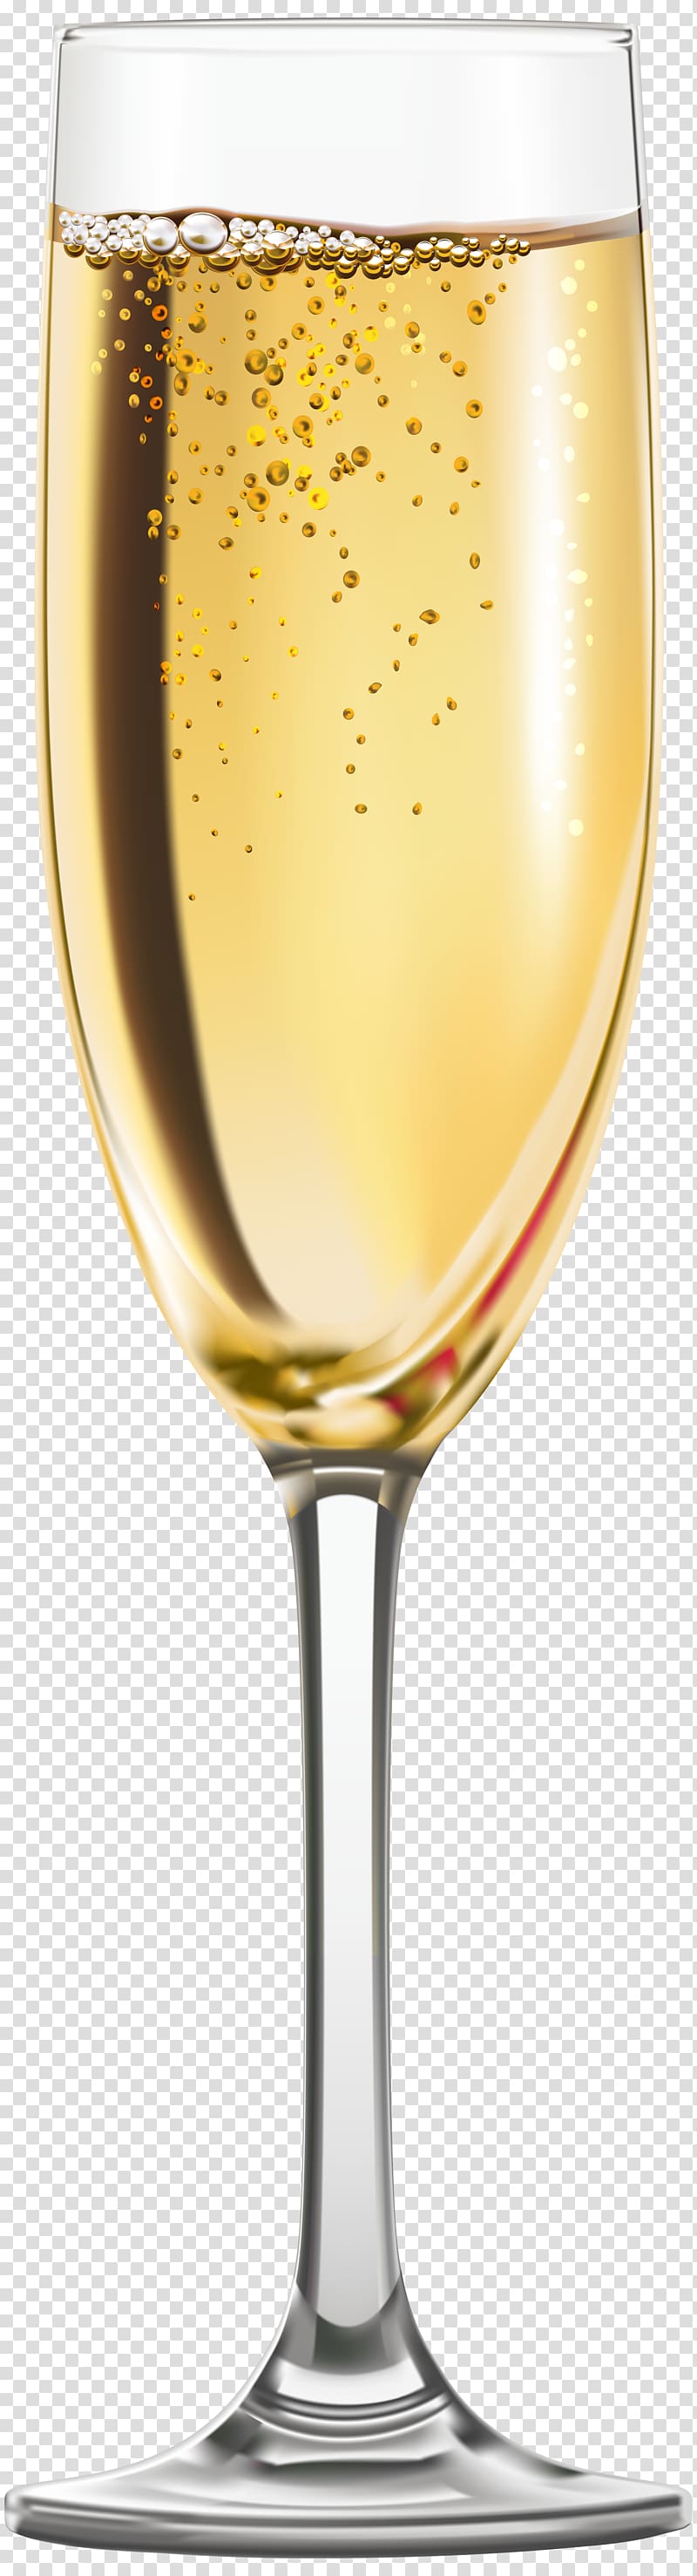 glass of champagne, White wine Champagne Cocktail Wine cocktail, Glass of Champagne transparent background PNG clipart